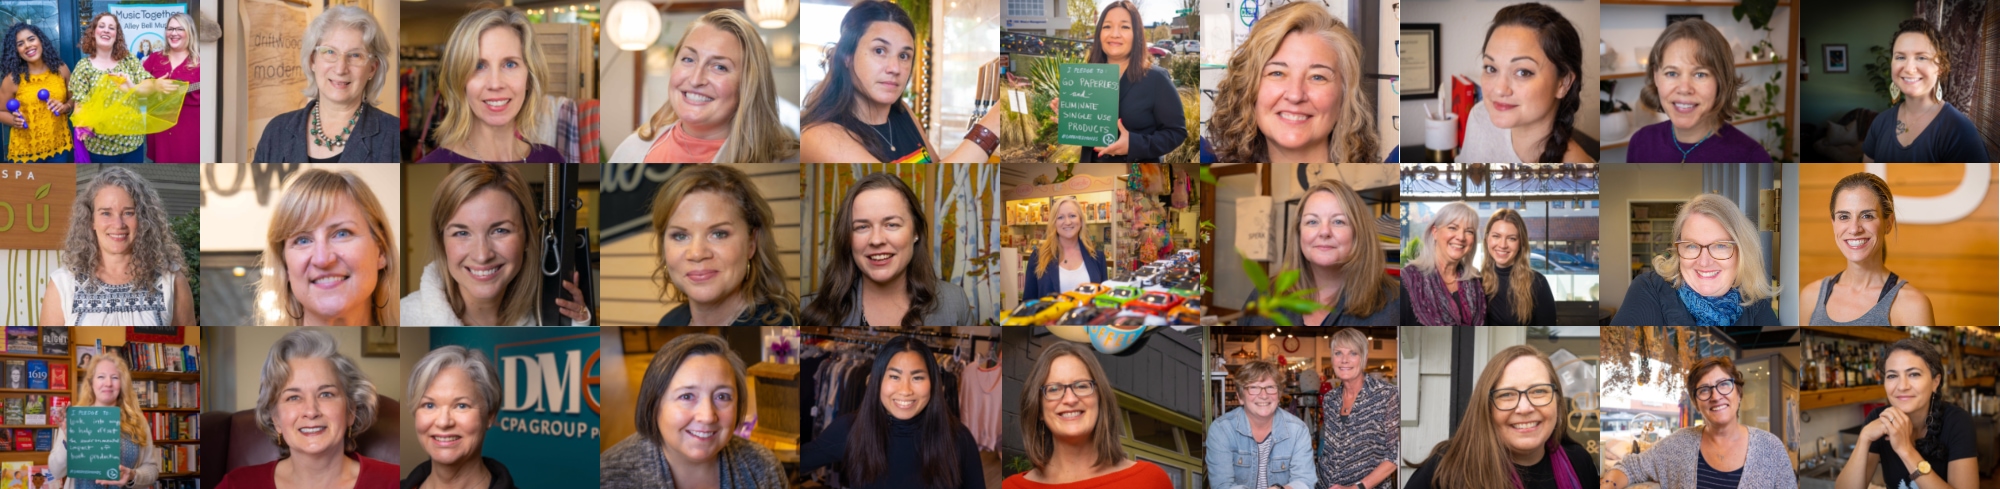 Women-Owned Businesses in Edmonds